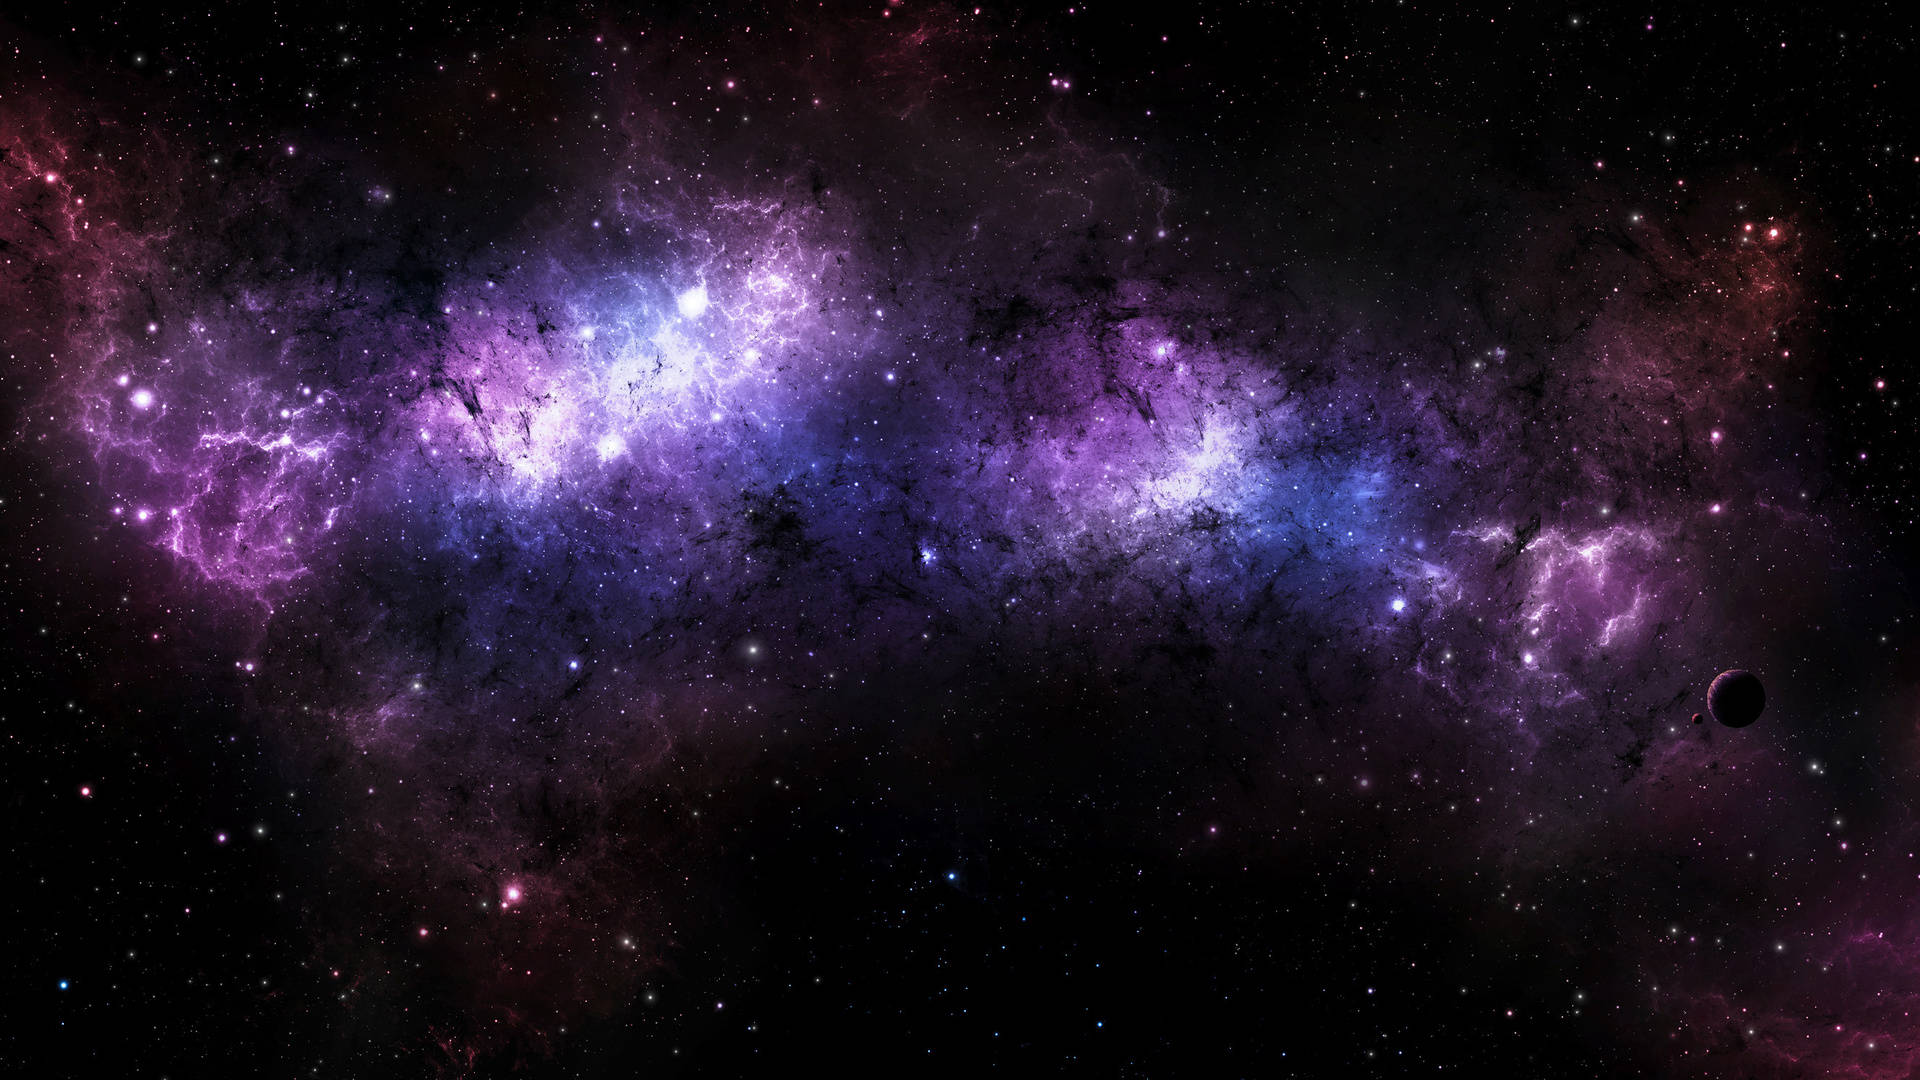 Free Galaxy Wallpaper Downloads, [1000+] Galaxy Wallpapers for FREE |  